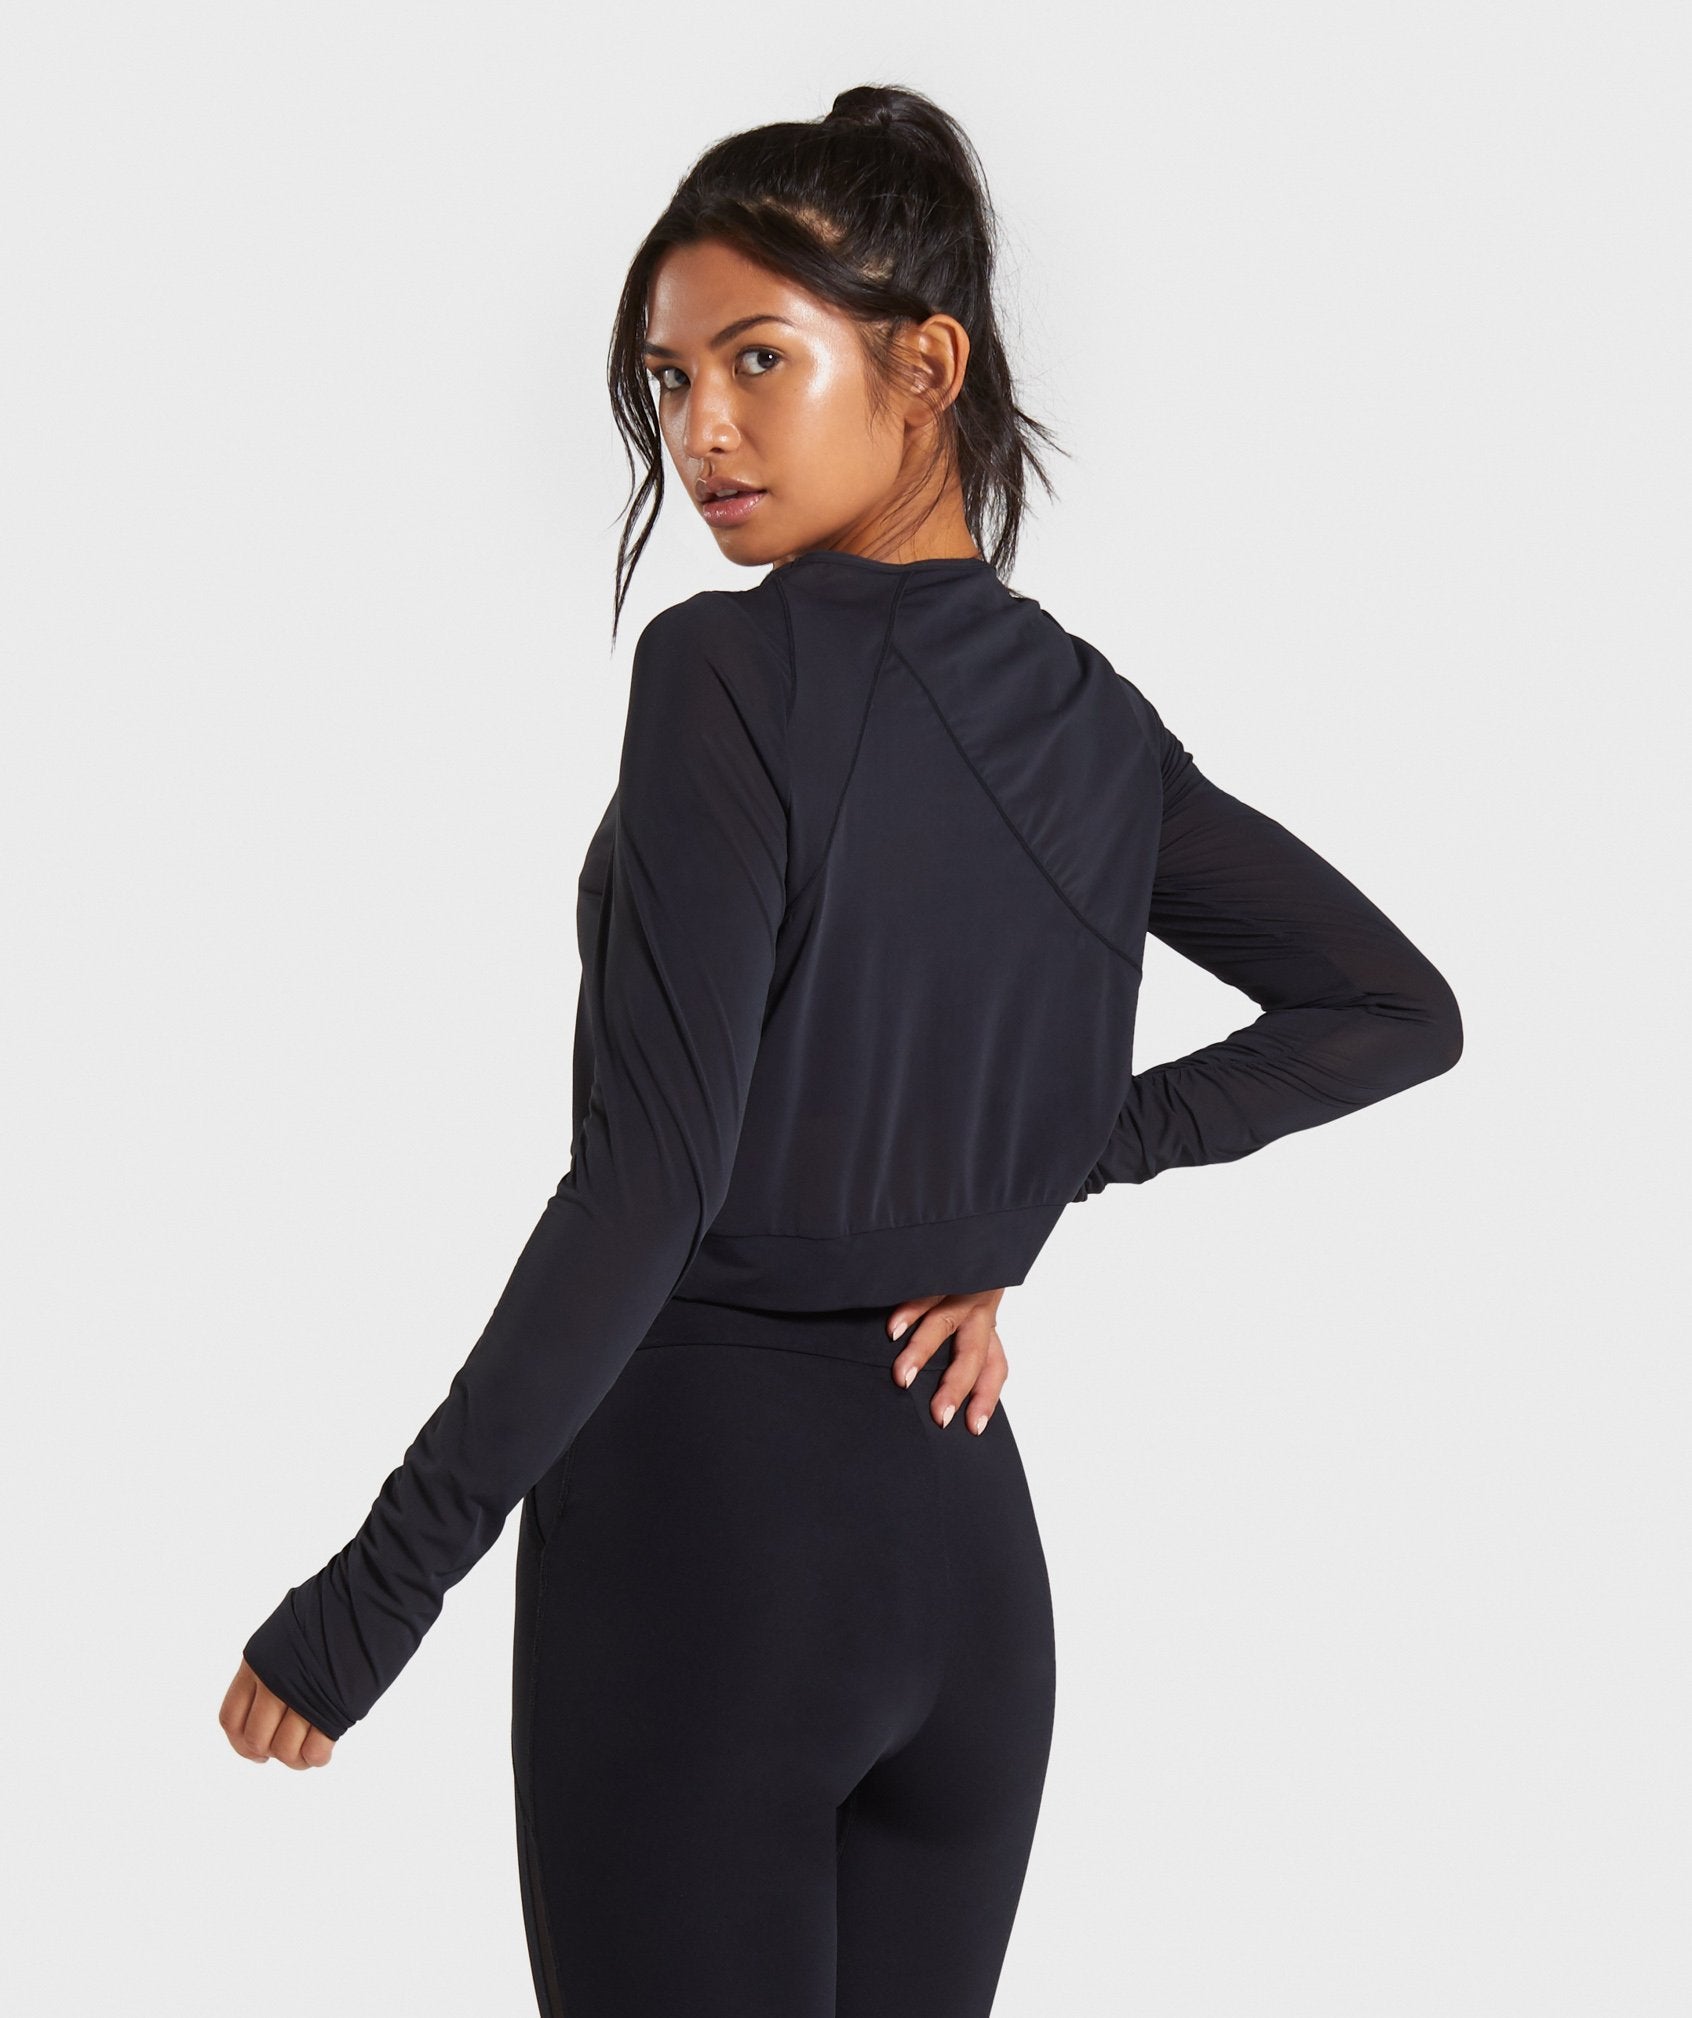 Mesh Layer Long Sleeve Top in Black - view 2